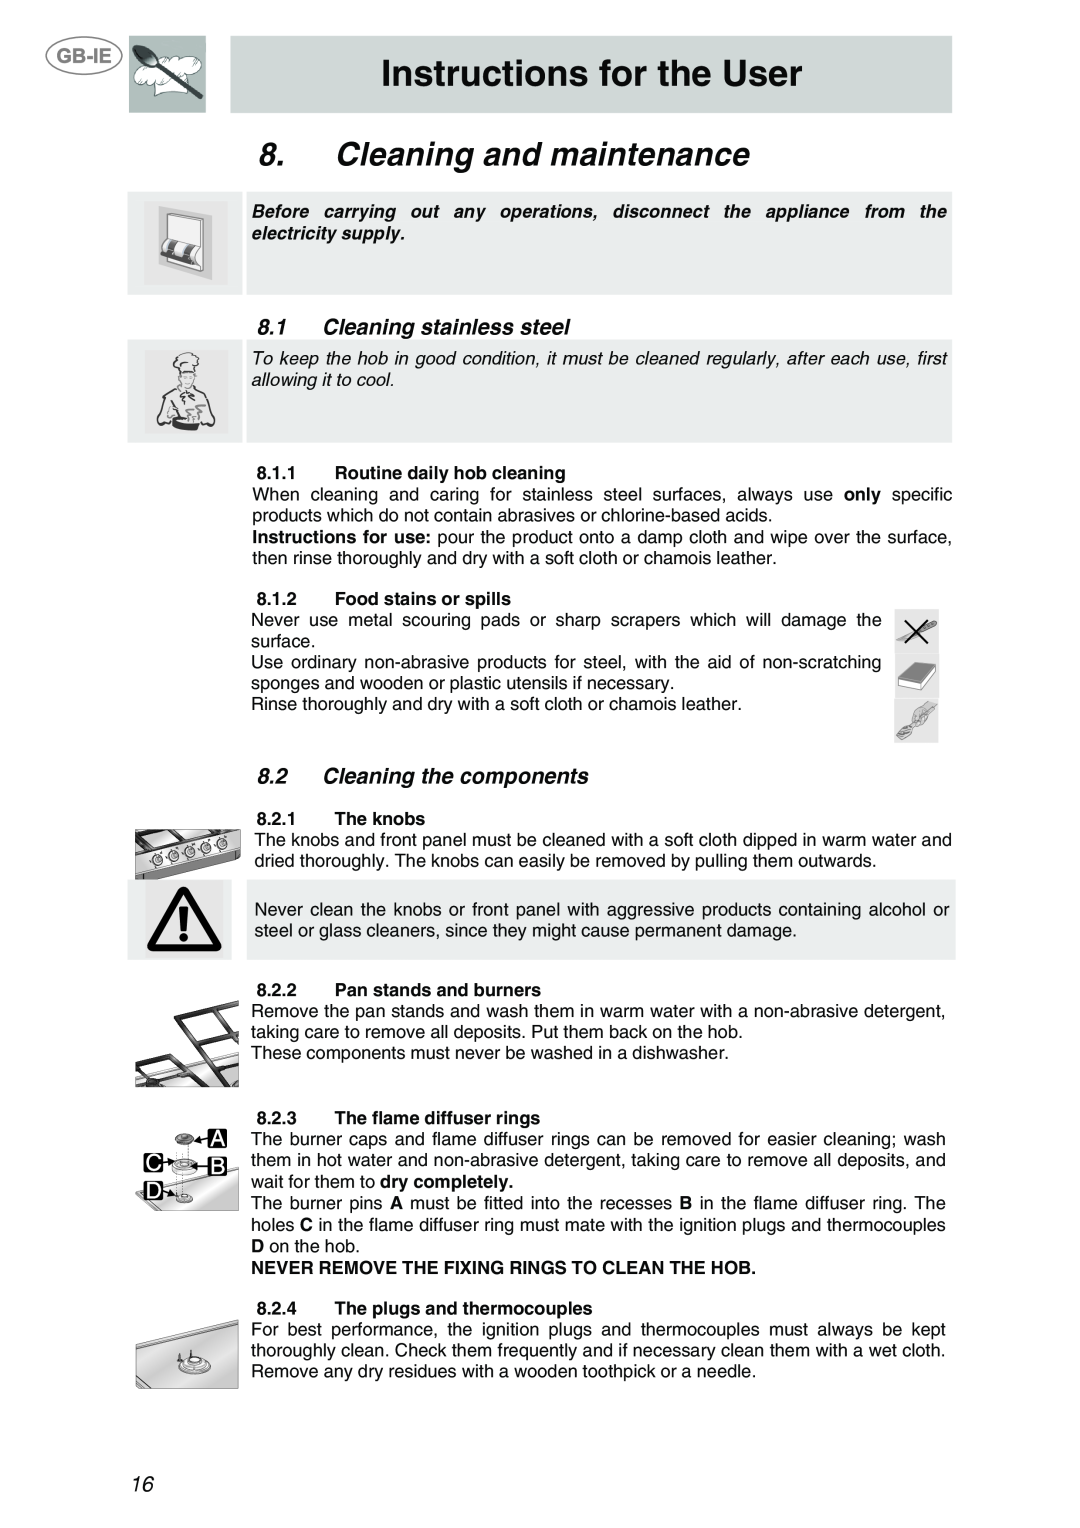 Smeg PTS723-3 manual Cleaning and maintenance, Cleaning stainless steel, Cleaning the components, Instructions for the User 